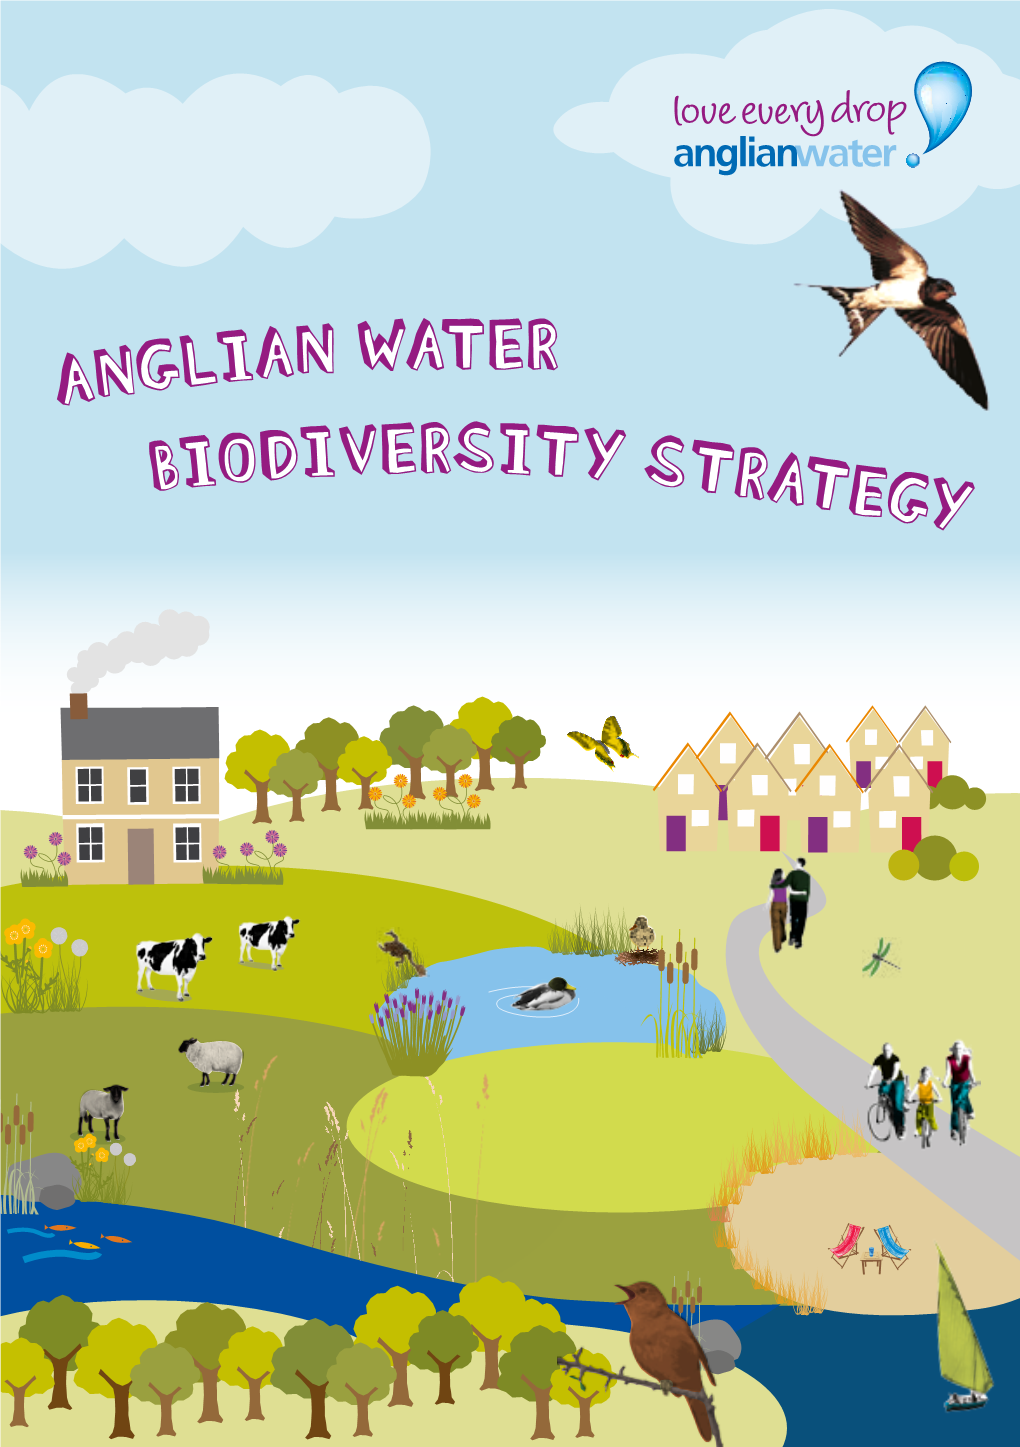 ANGLIAN WATER SUPPLIES WATER and WATER RECYCLING Economy and Prospering 6 Threats and Challenges SERVICES to OVER SIX MILLION DOMESTIC and Communities